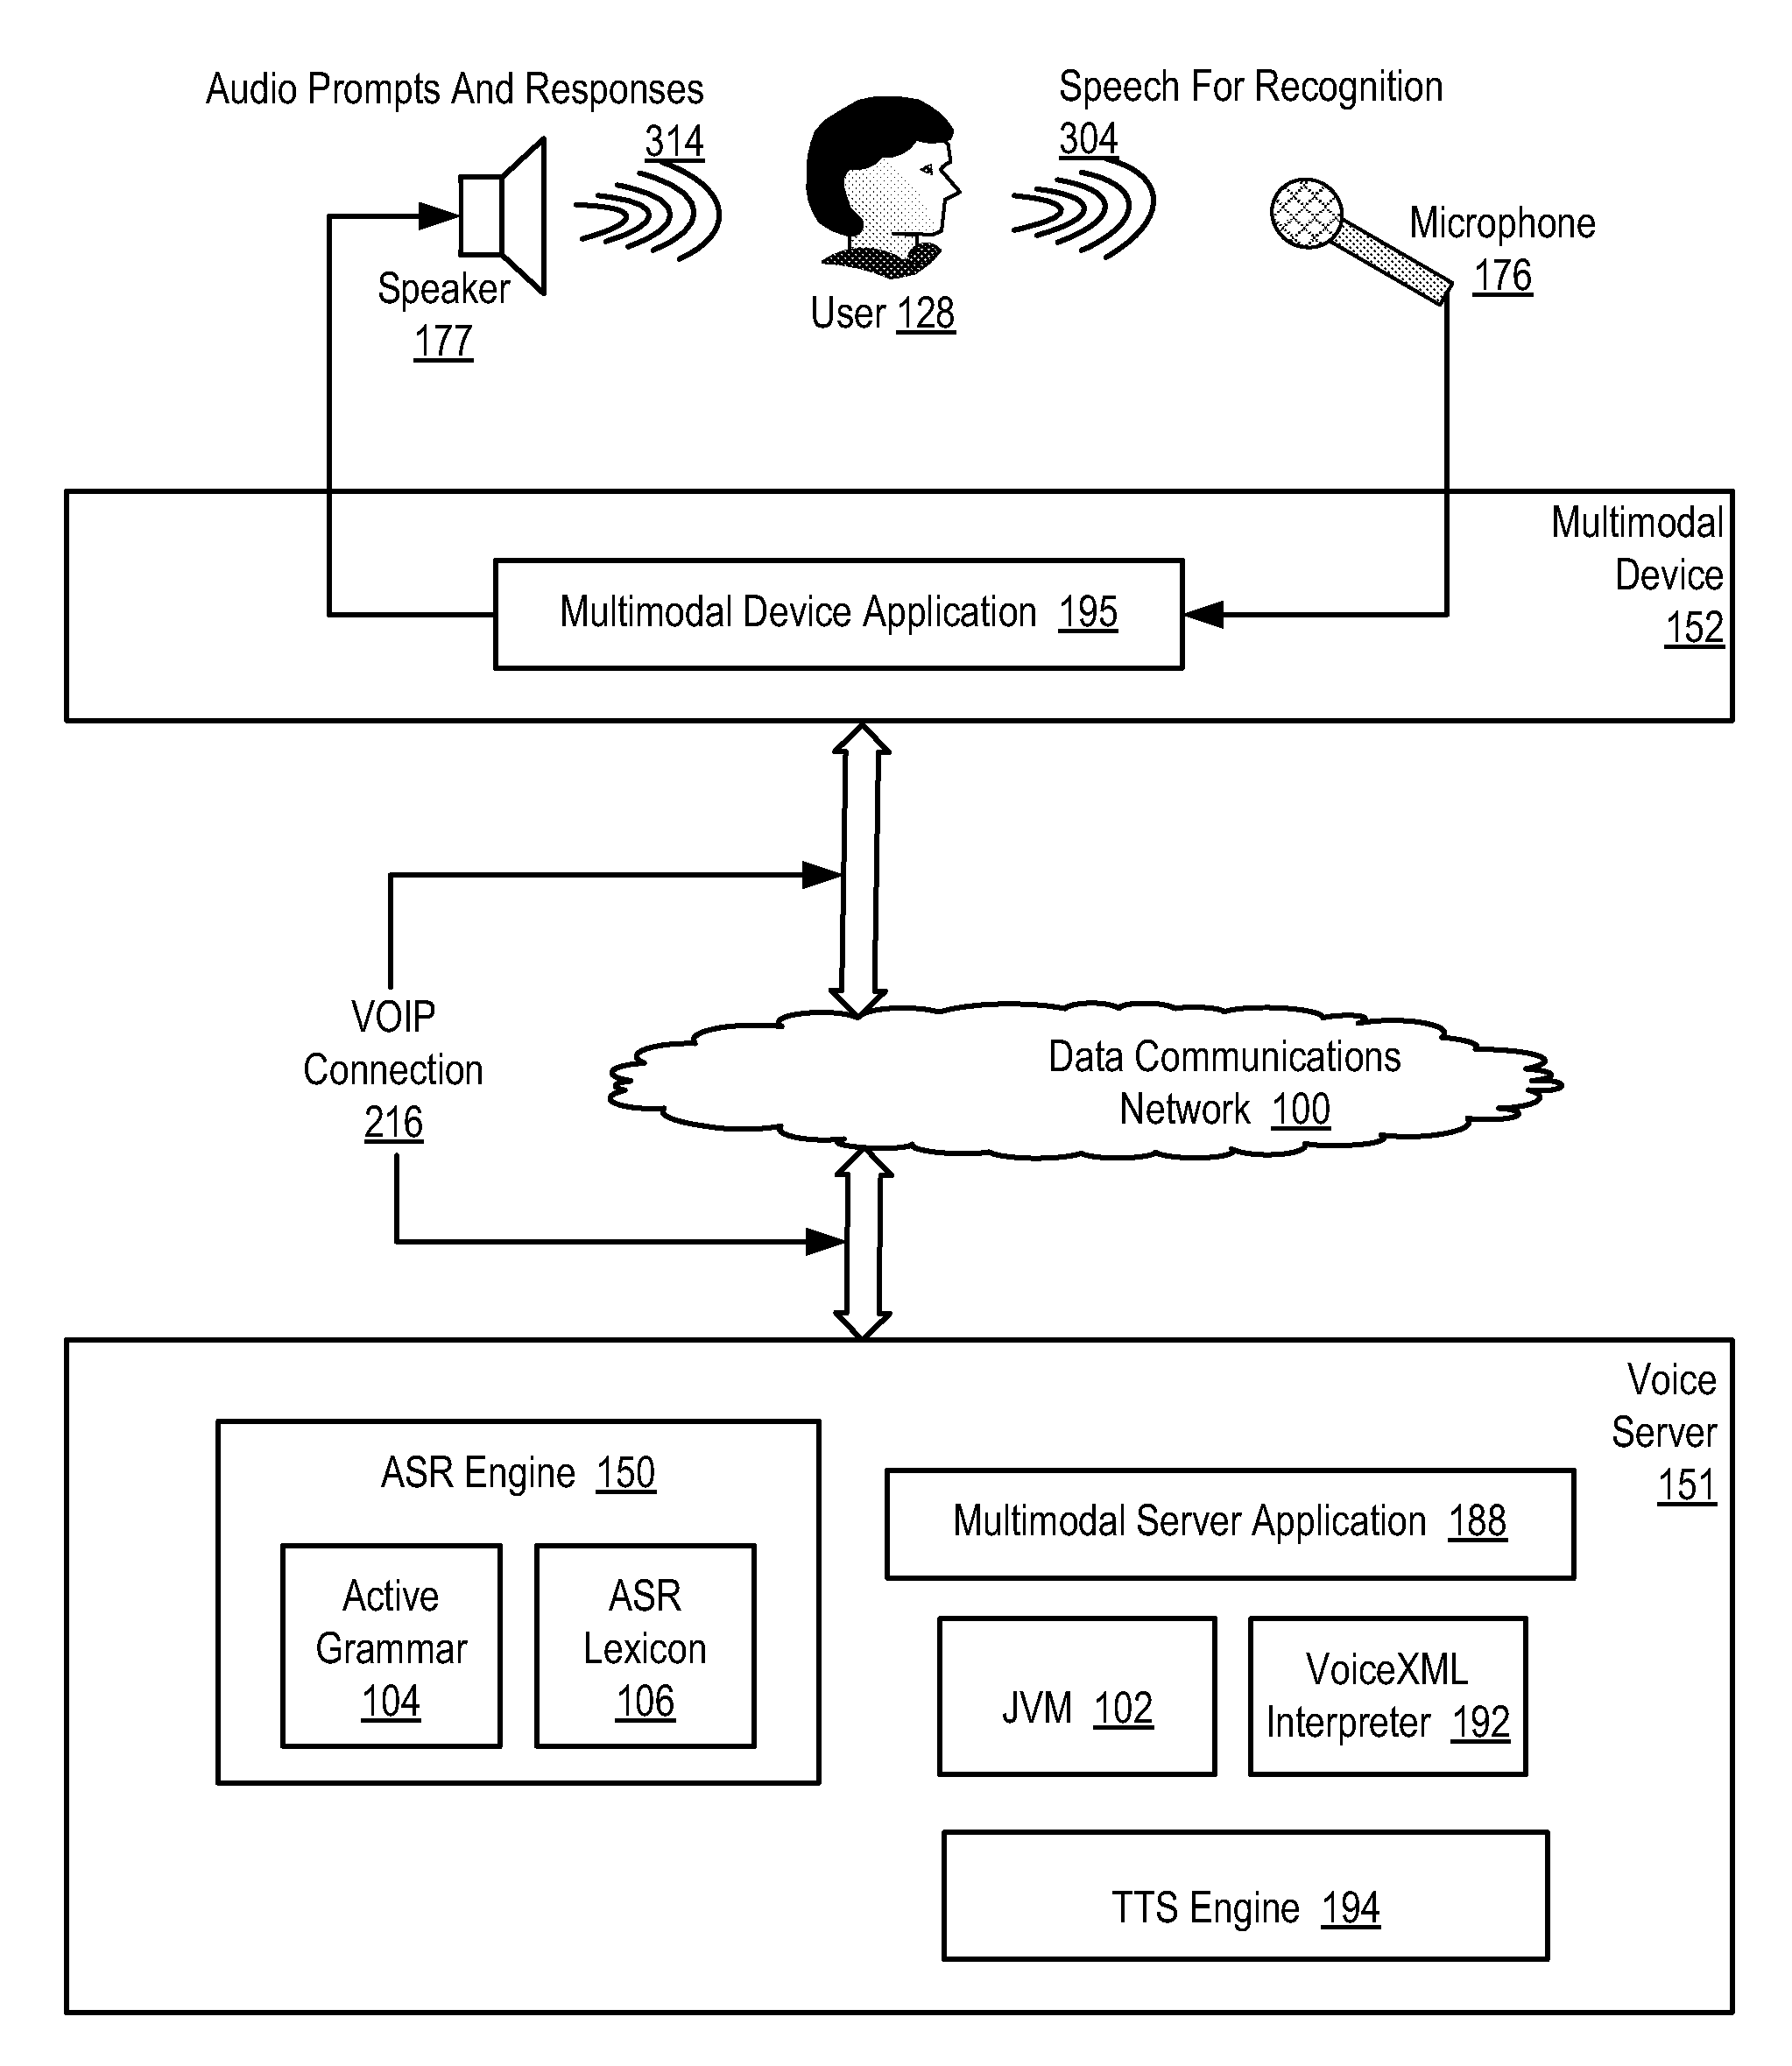 Oral modification of an asr lexicon of an asr engine